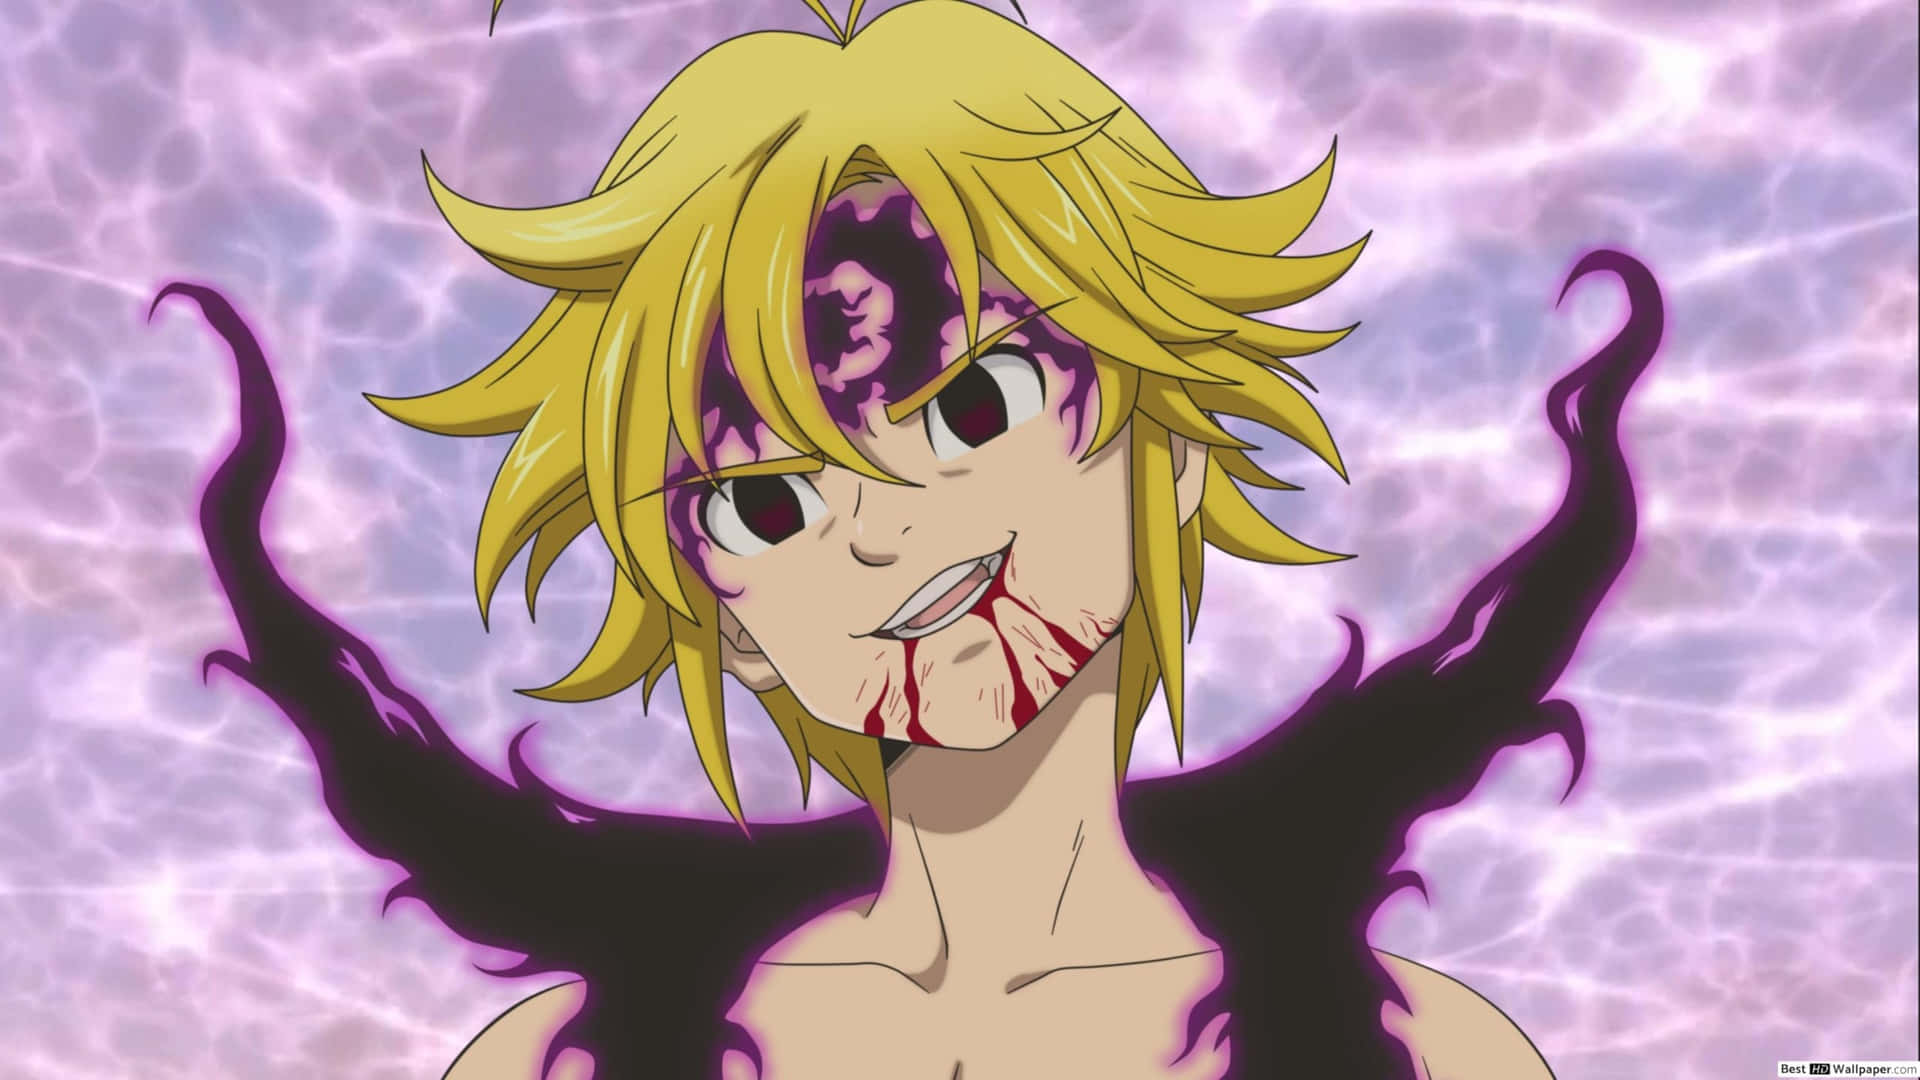 Meliodas,demon King Of The Seven Deadly Sins Would Be Translated To 